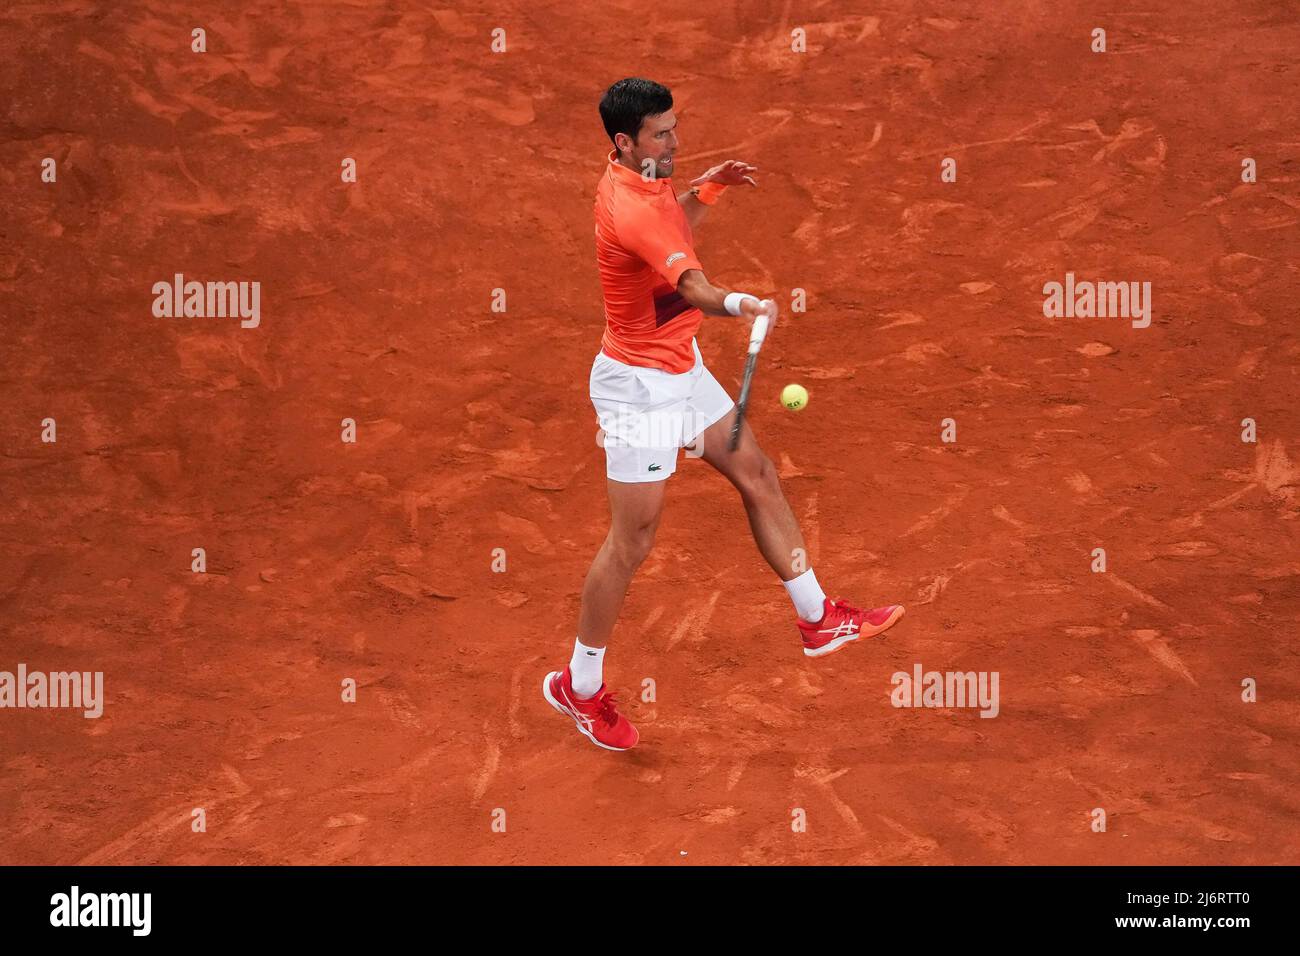 Novak Djokovic of Serbia plays during his singles match against Gael  Monfils of France during Day Six of Mutua Madrid Open at La Caja Magica in  Madrid. Novak Djokovic won by (6-3,6-2) (